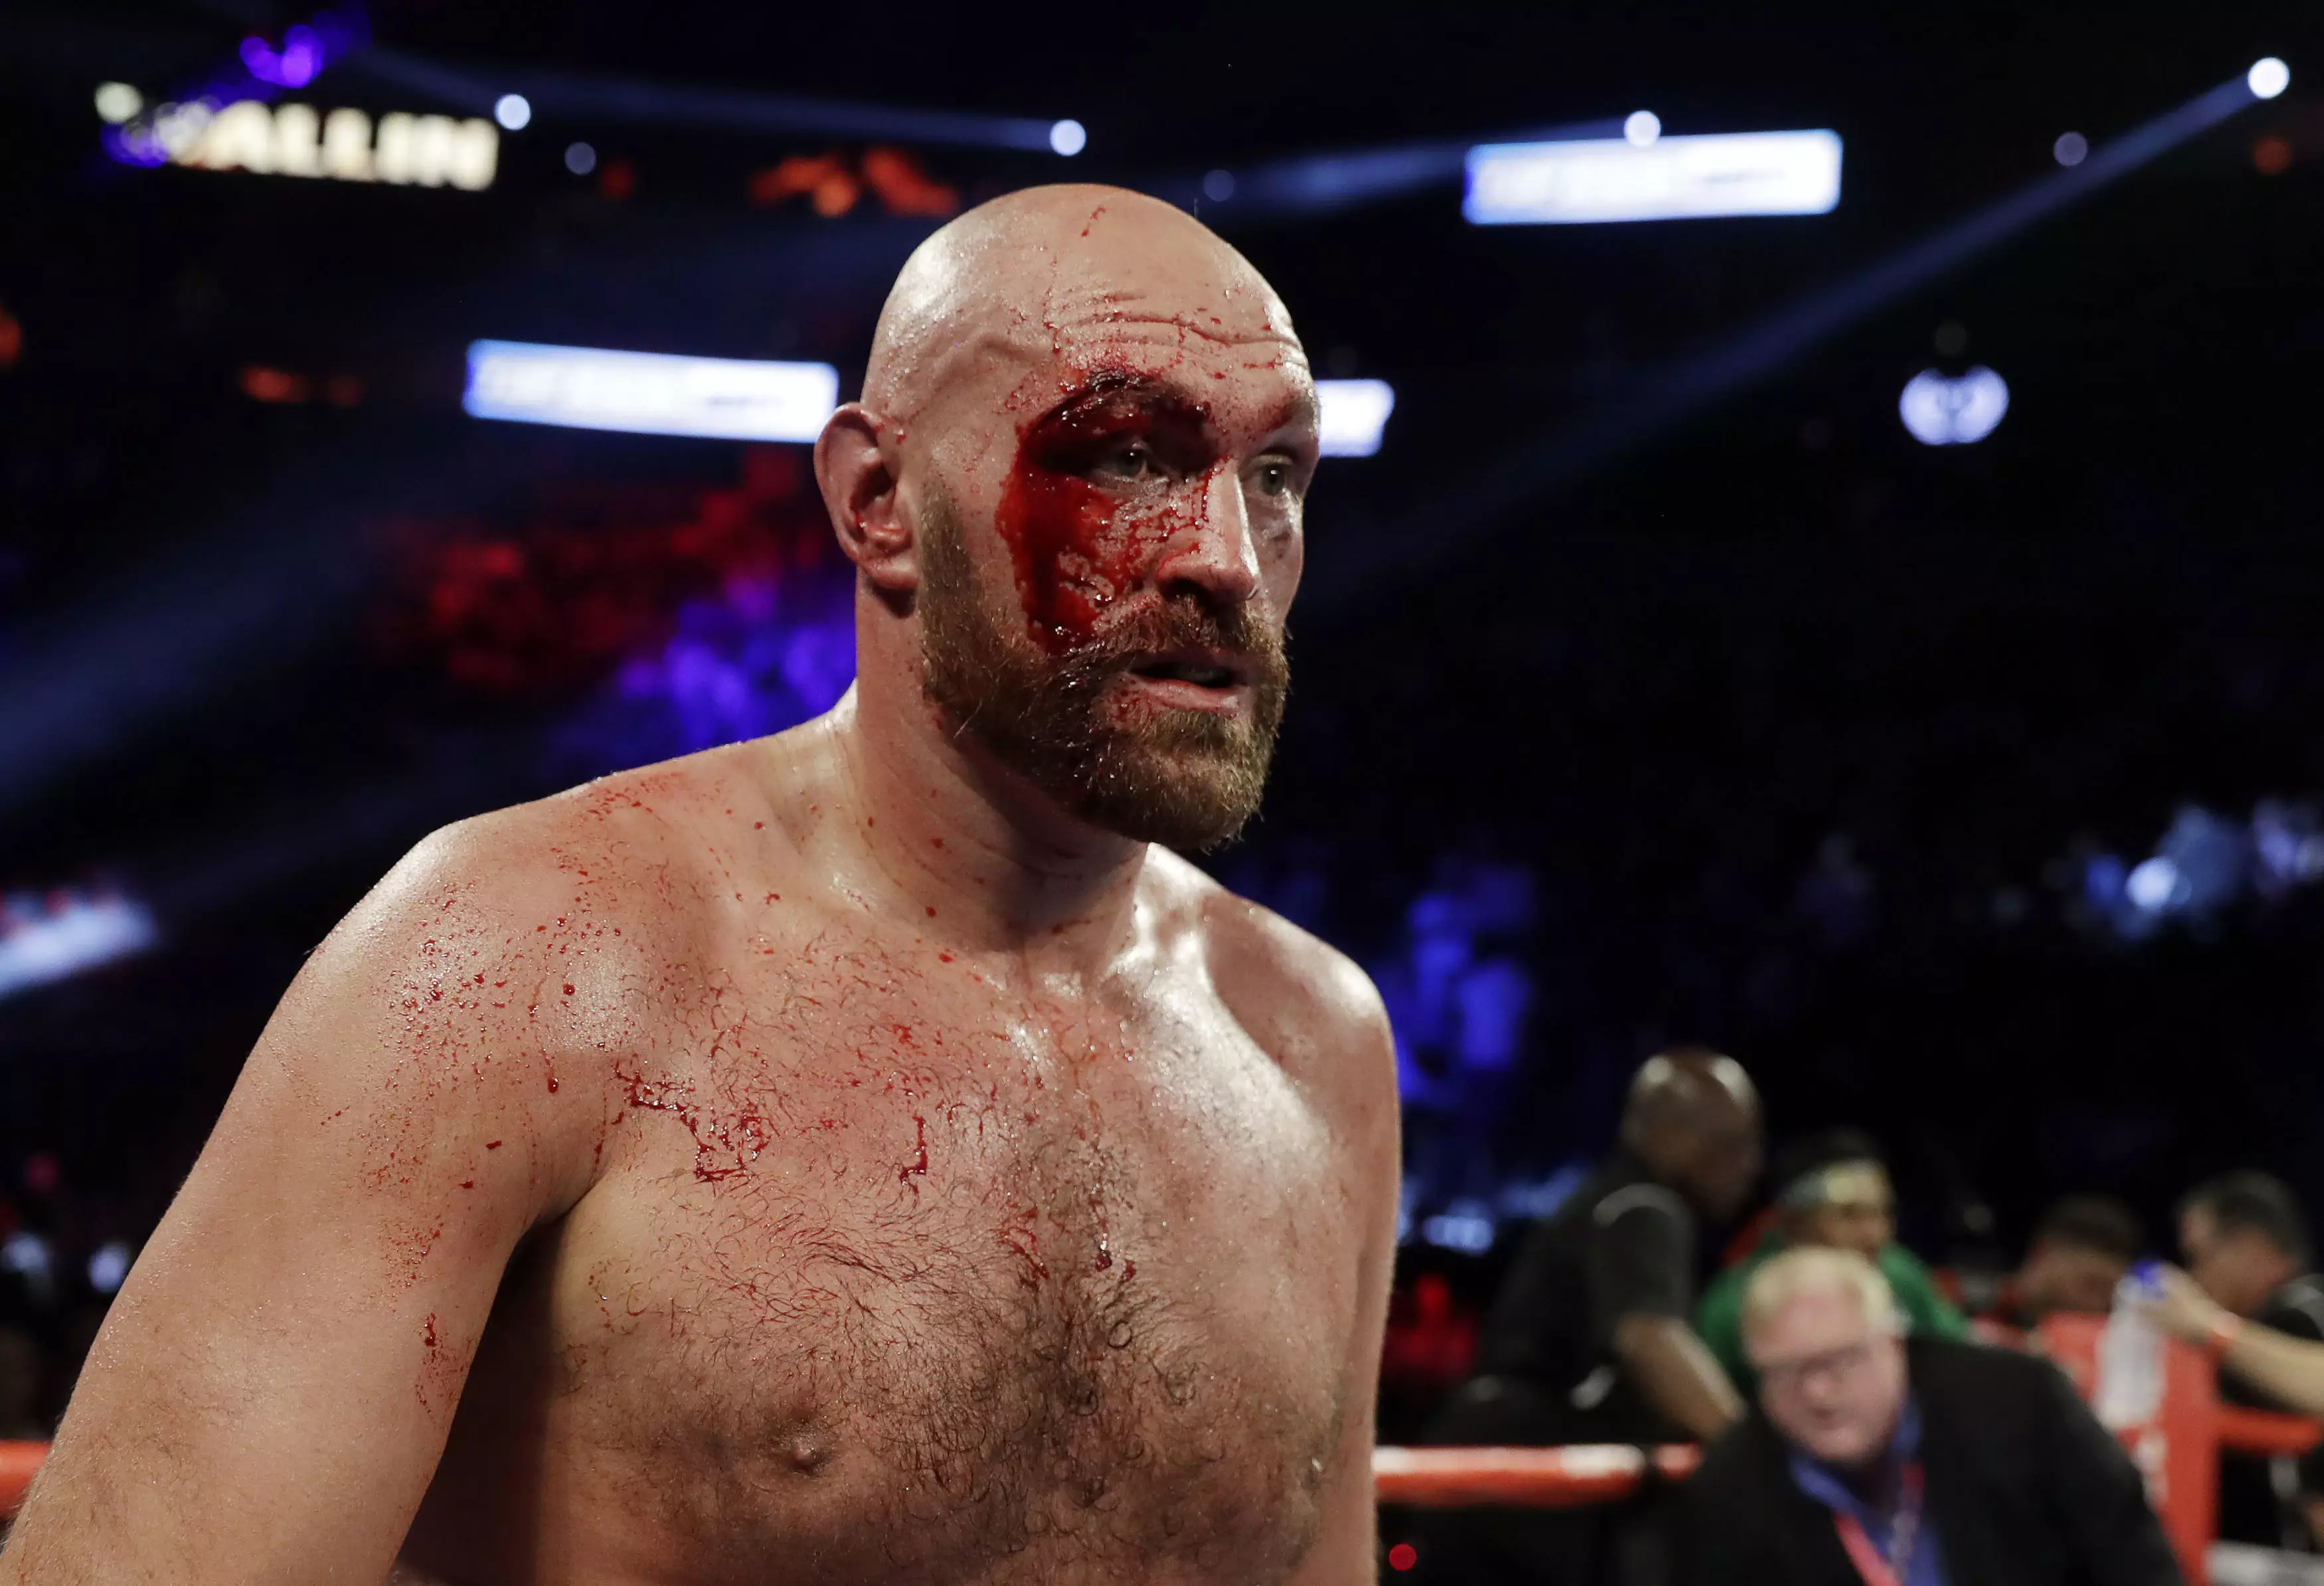 Fury said he had more than 40 stitches and a few beers after the fight.